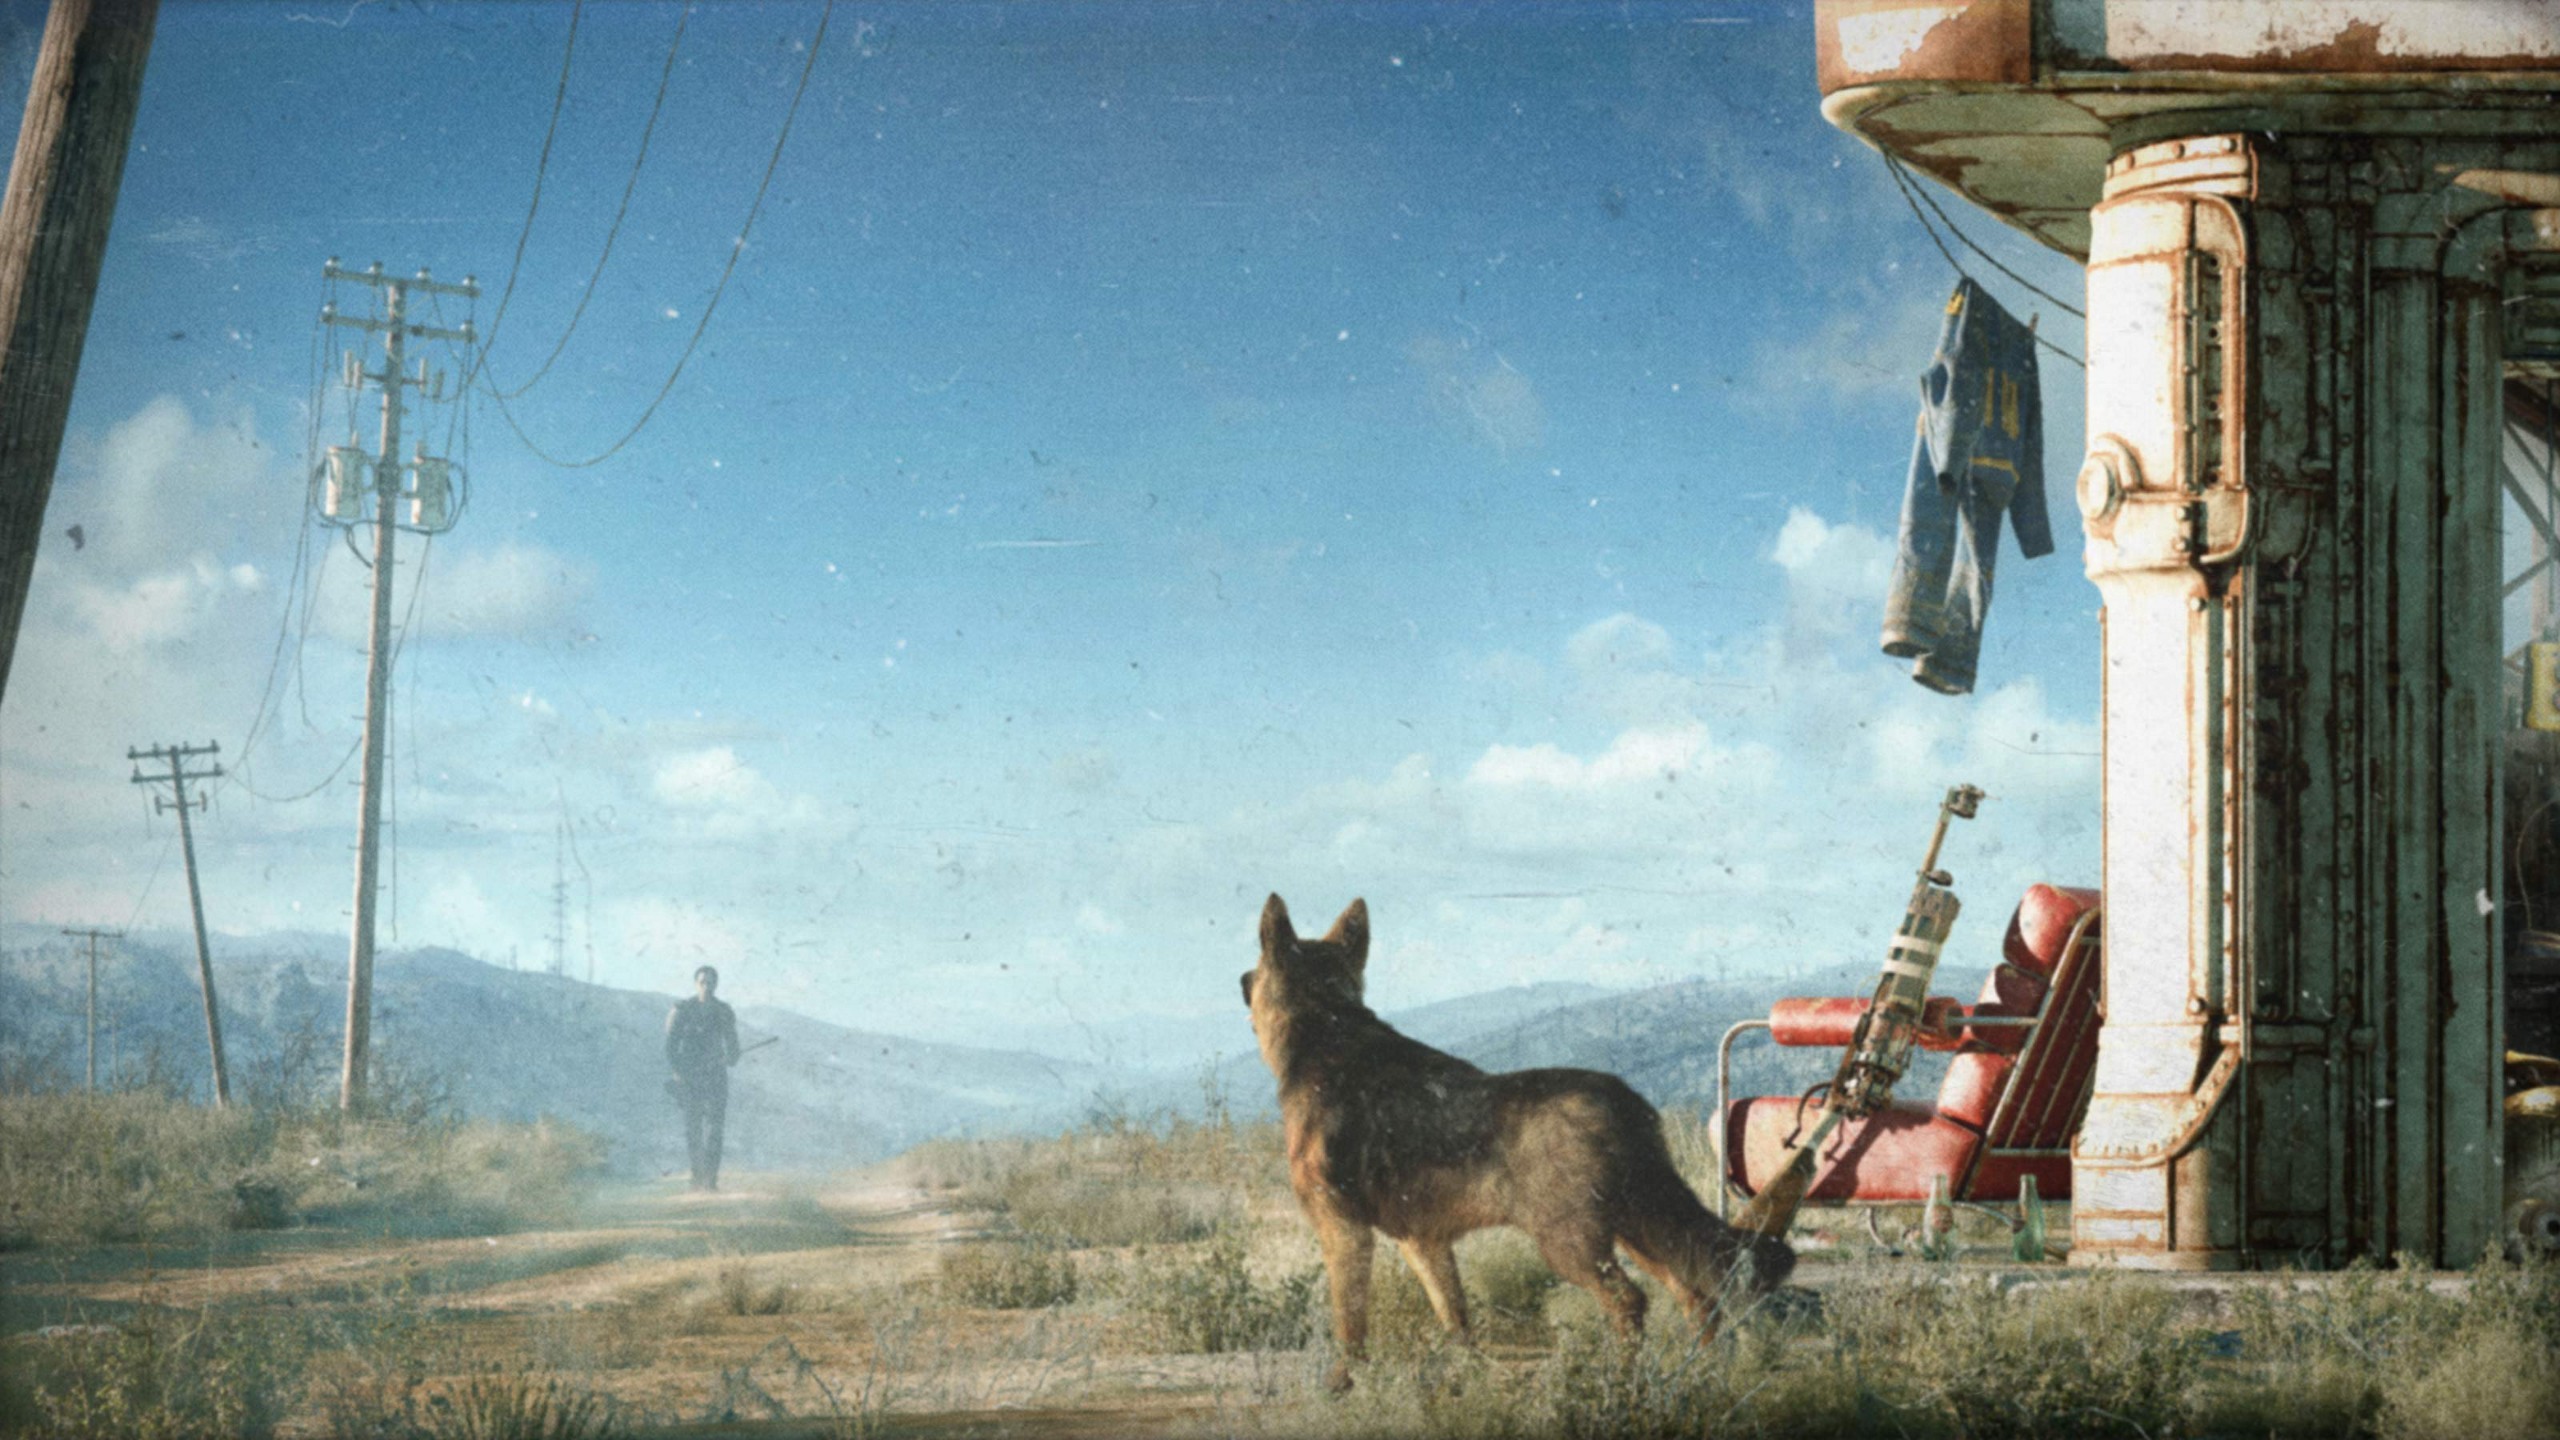 Fallout 4 Wallpaper For Android For Desktop Wallpaper 2560 x 1440 px 1.08 MB 1920×1080 pipboy